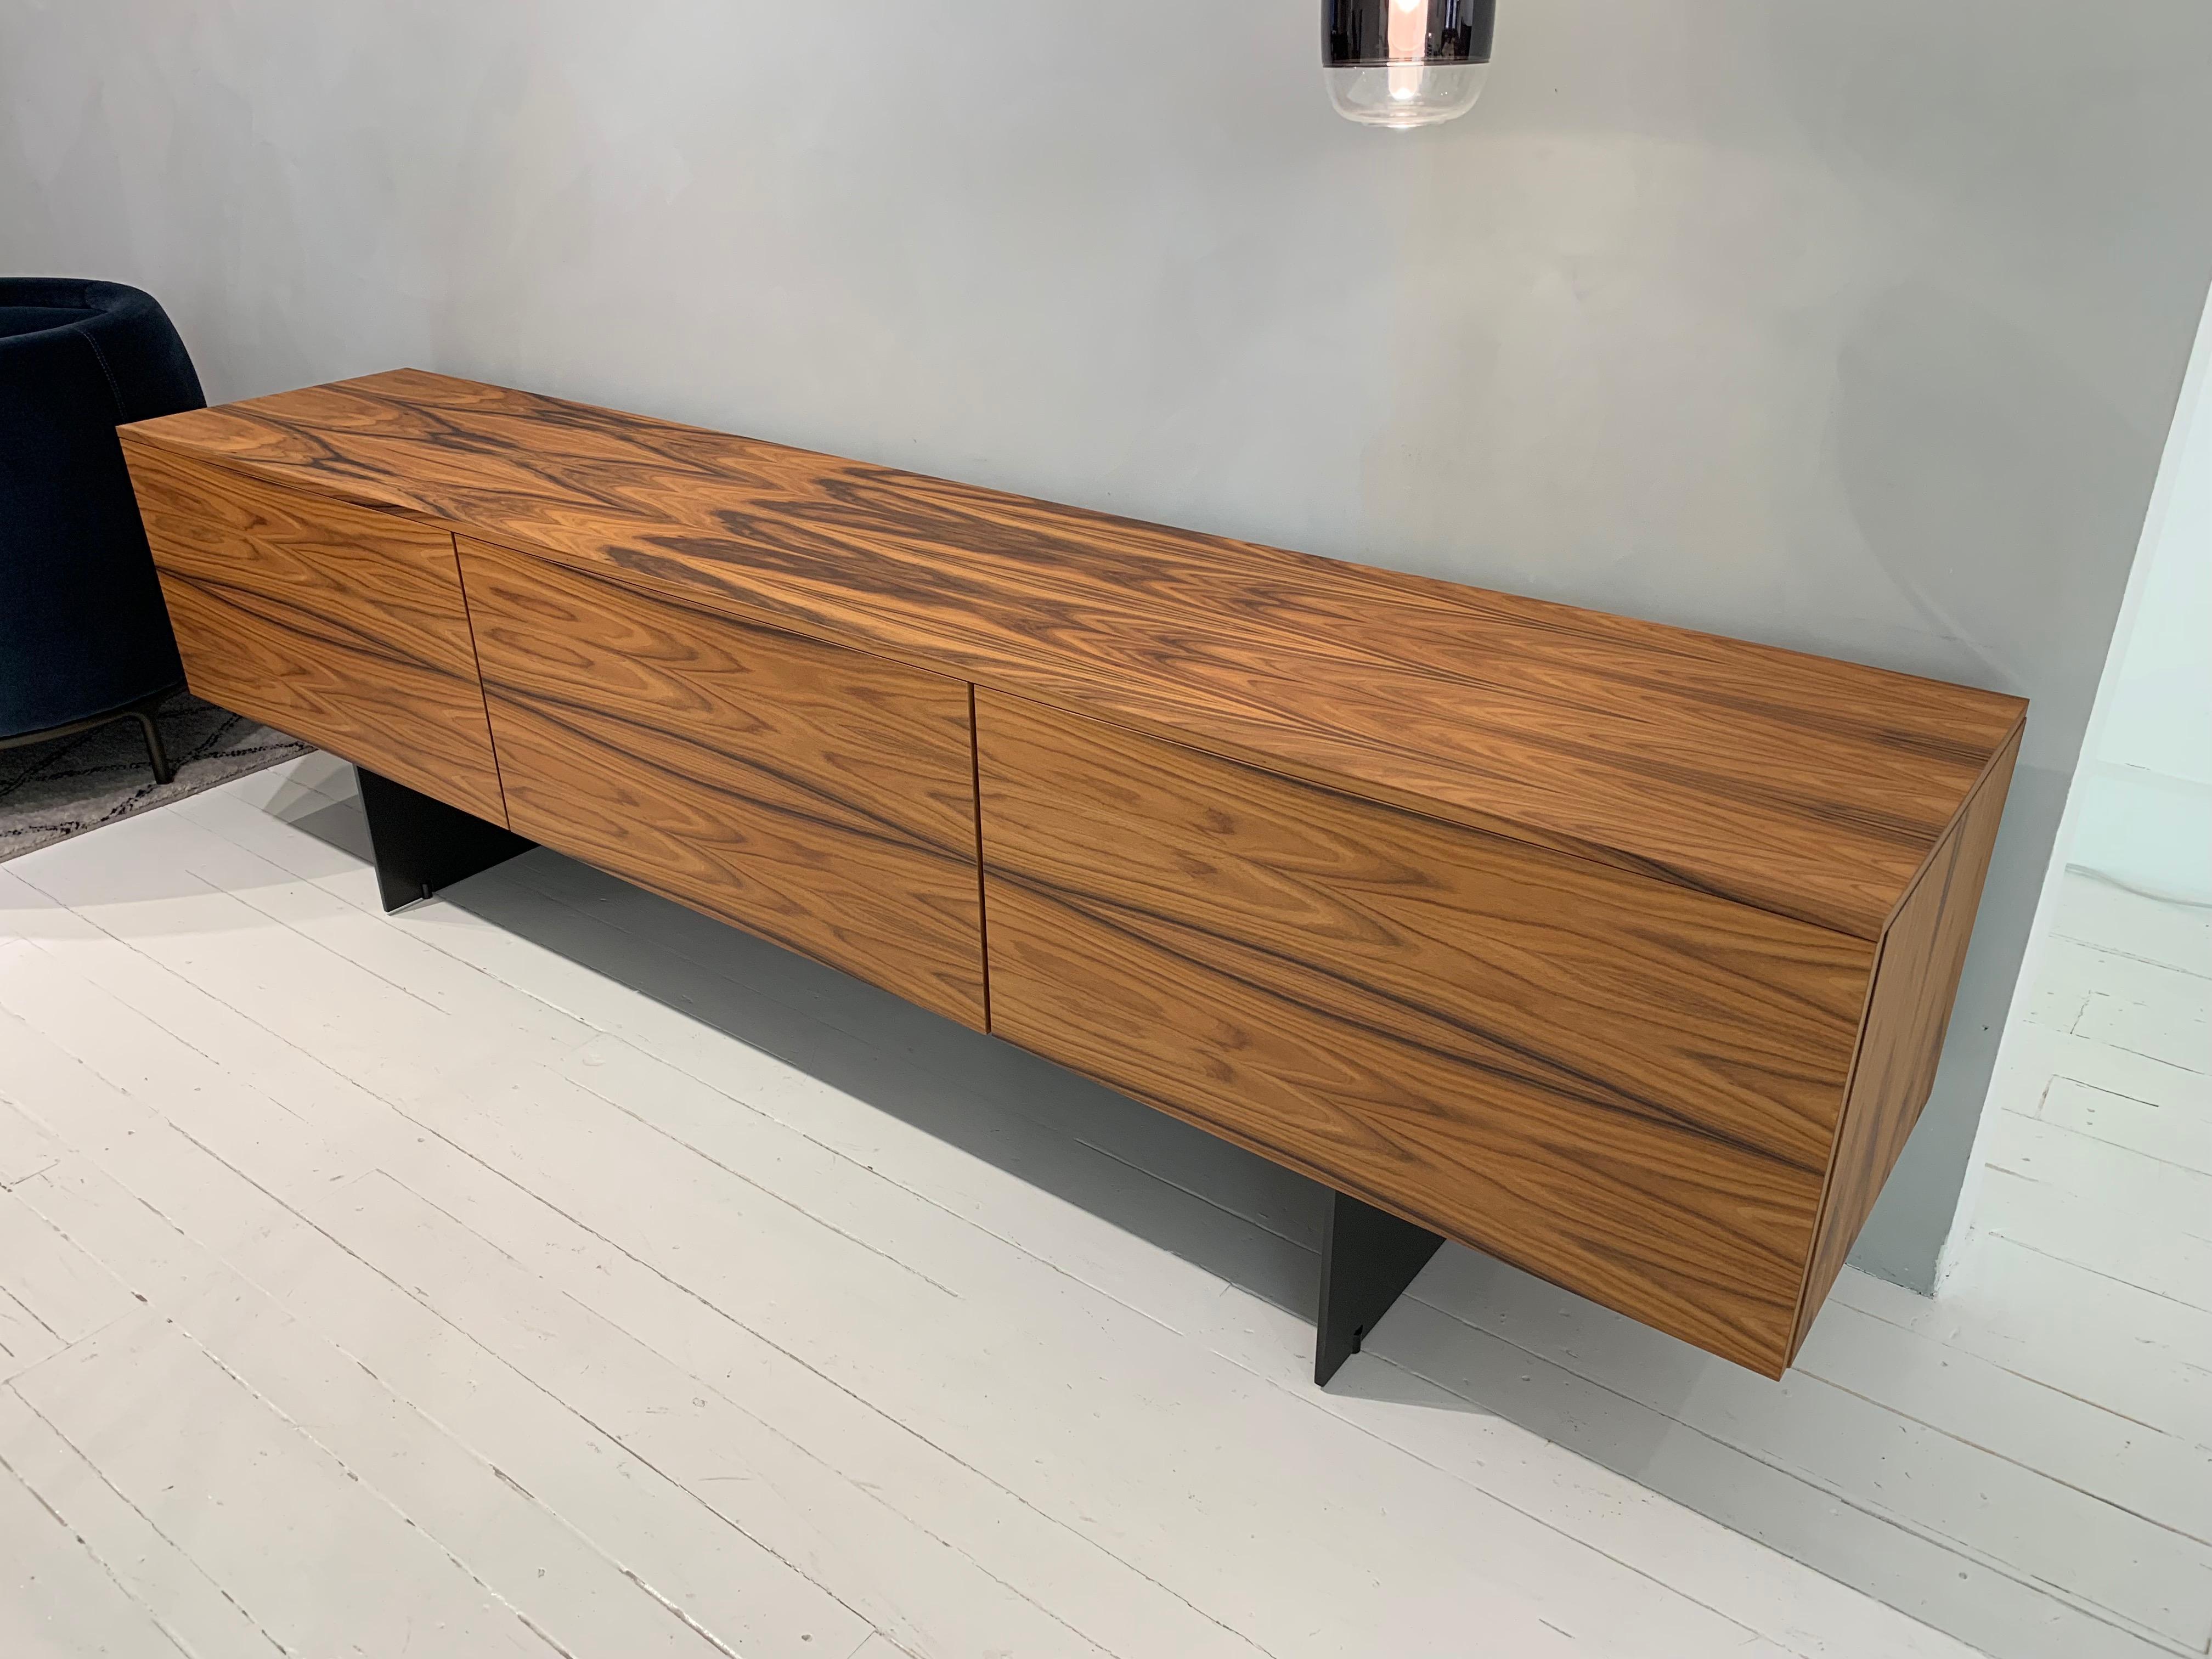 Modern credenza as shown in rosewood with iron base and drop-leaf doors. Simple in aesthetic with plentiful storage room. Designend by Piero Lissoni.

Dimensions: 94.75